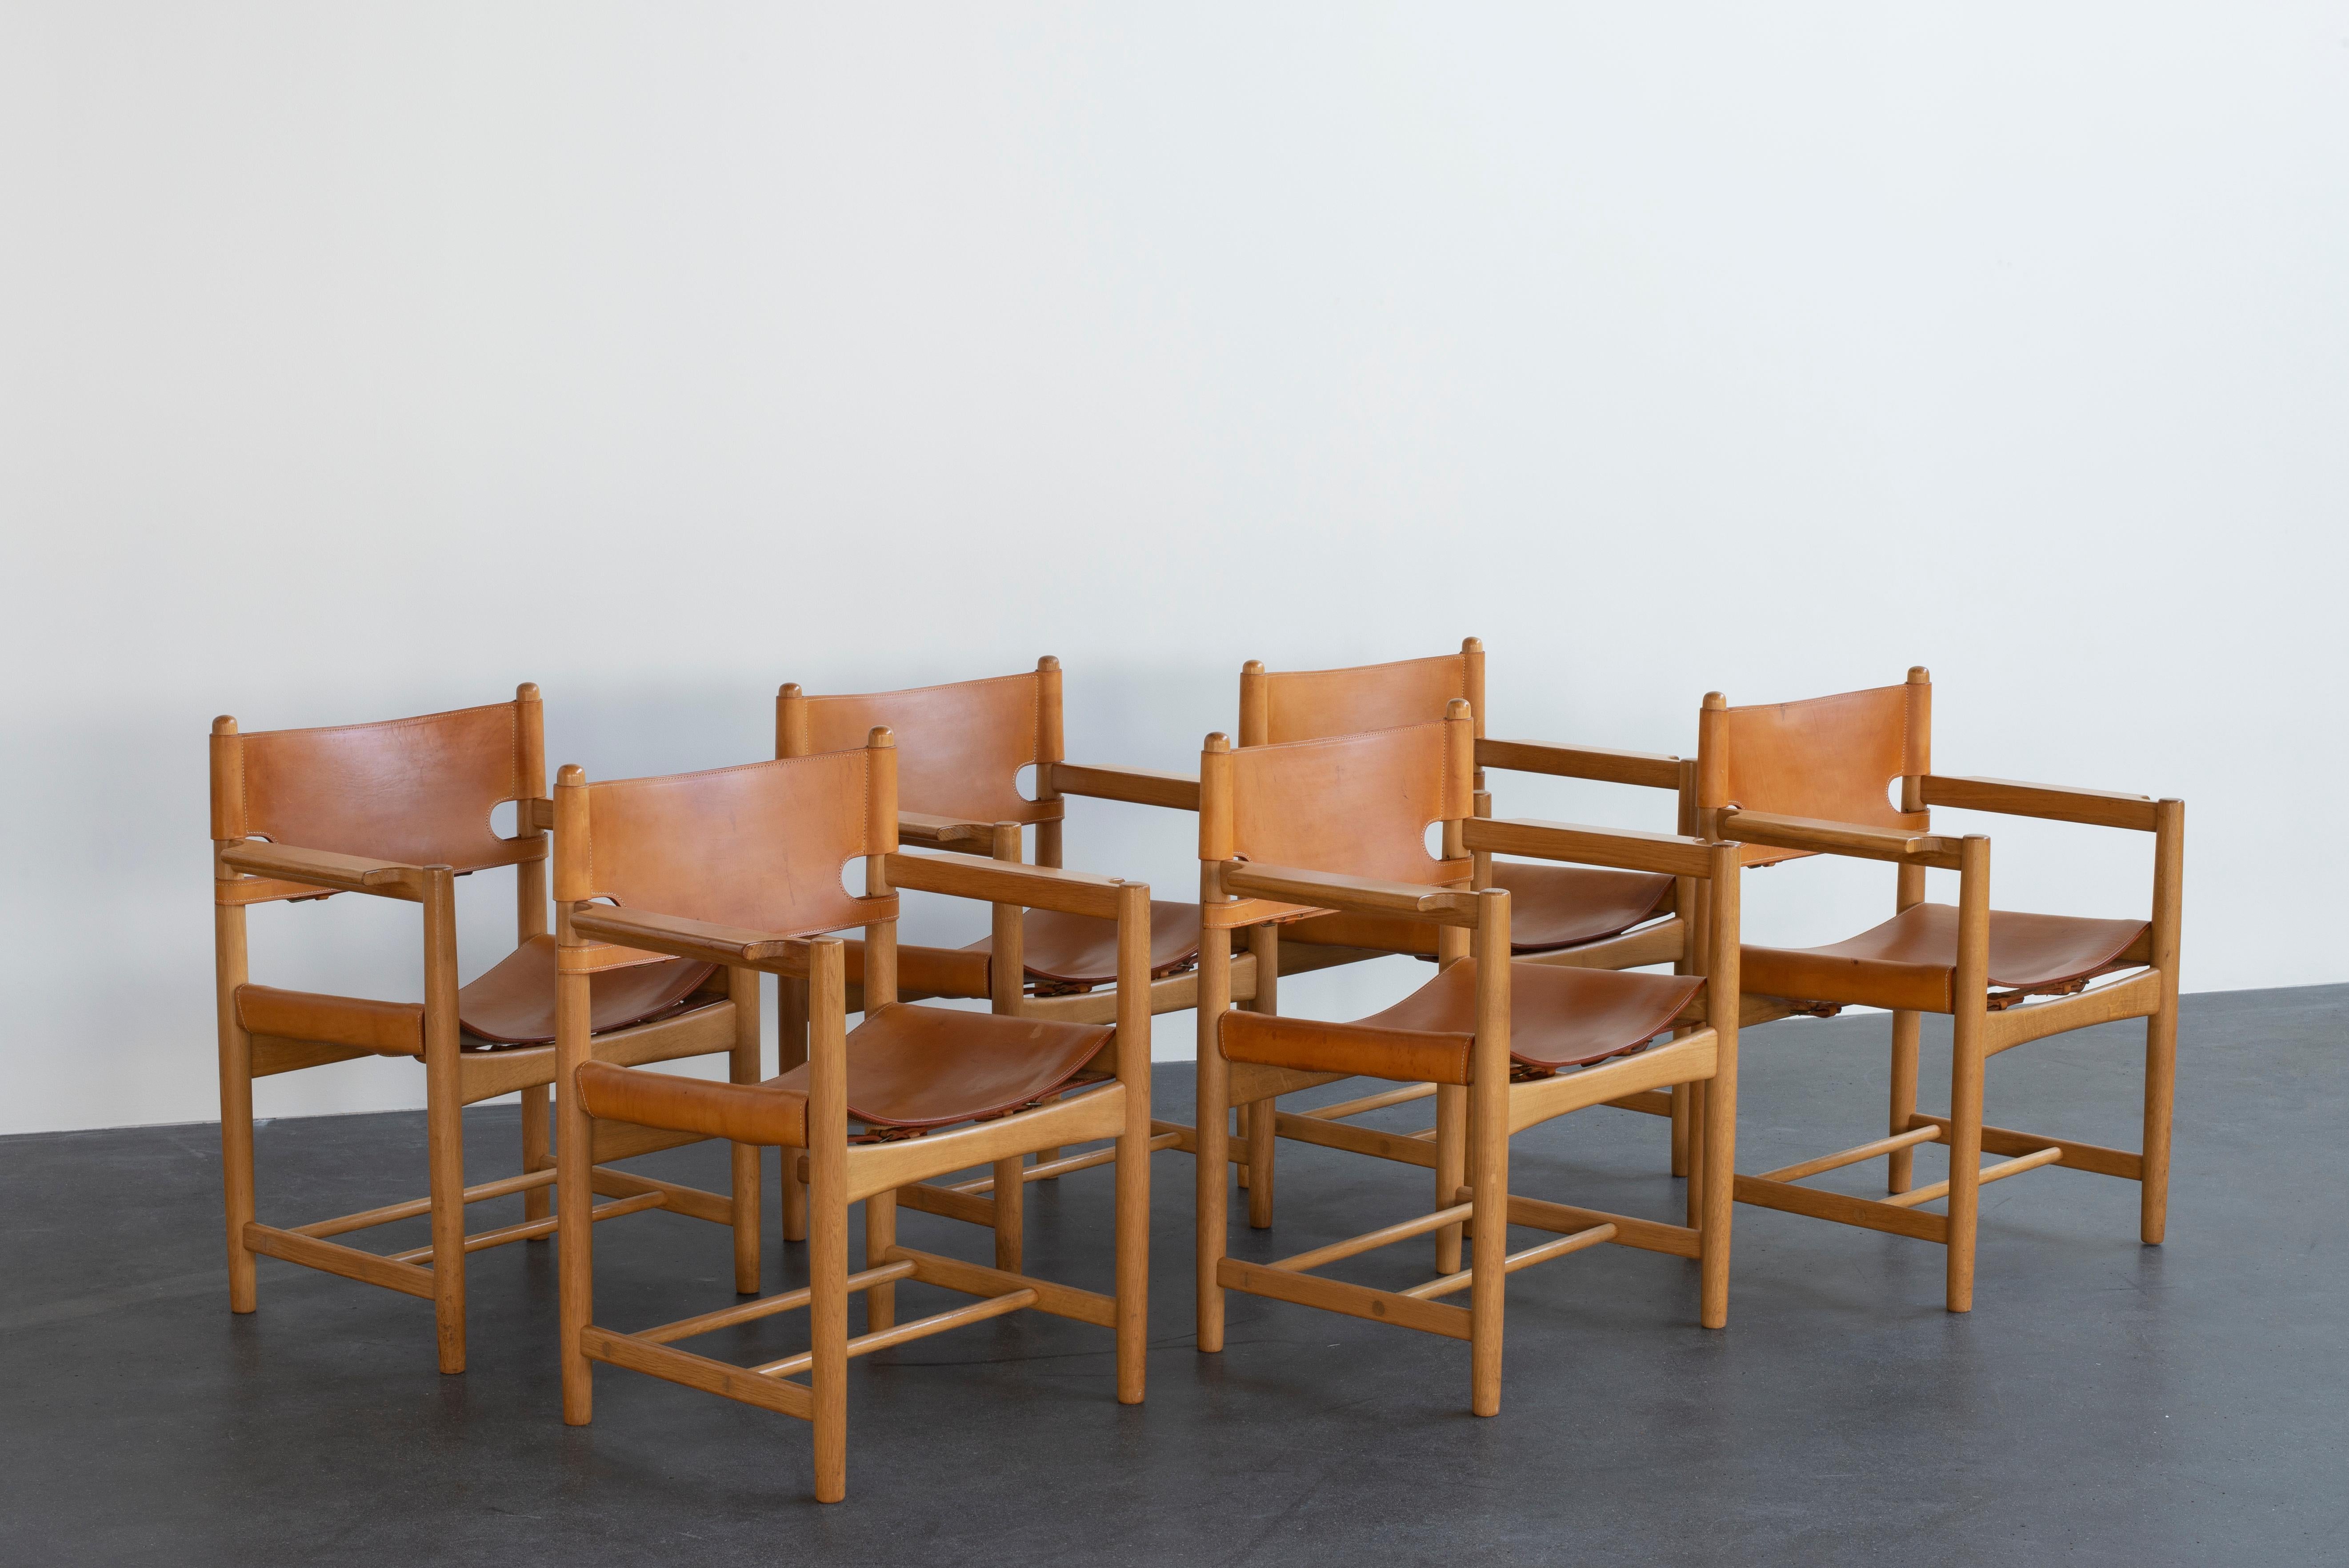 Børge Mogensen set of six chairs of oak and natural tanned leather. Executed by Fredericia Furniture.